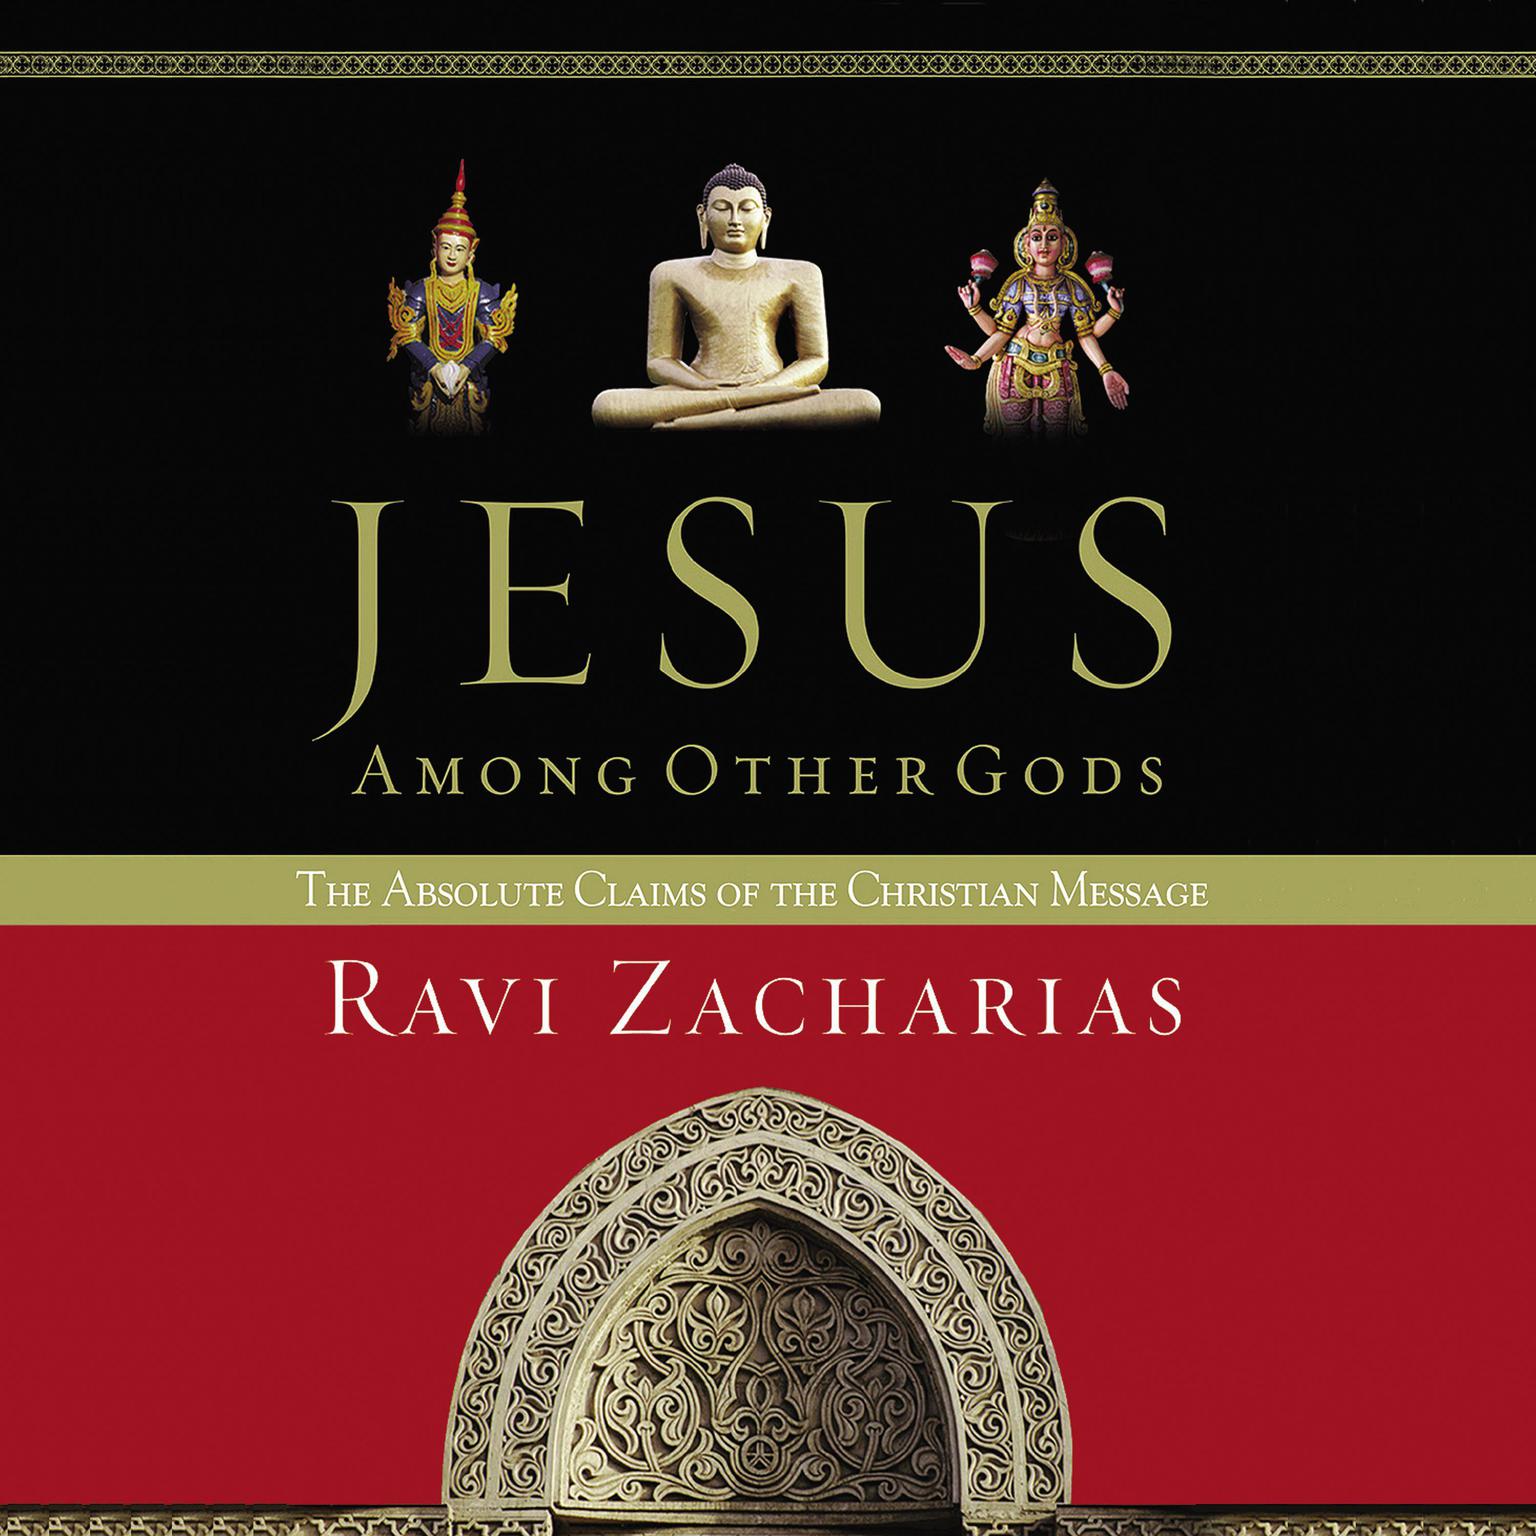 Jesus Among Other Gods (Abridged): The Absolute Claims of the Christian Message Audiobook, by Ravi Zacharias